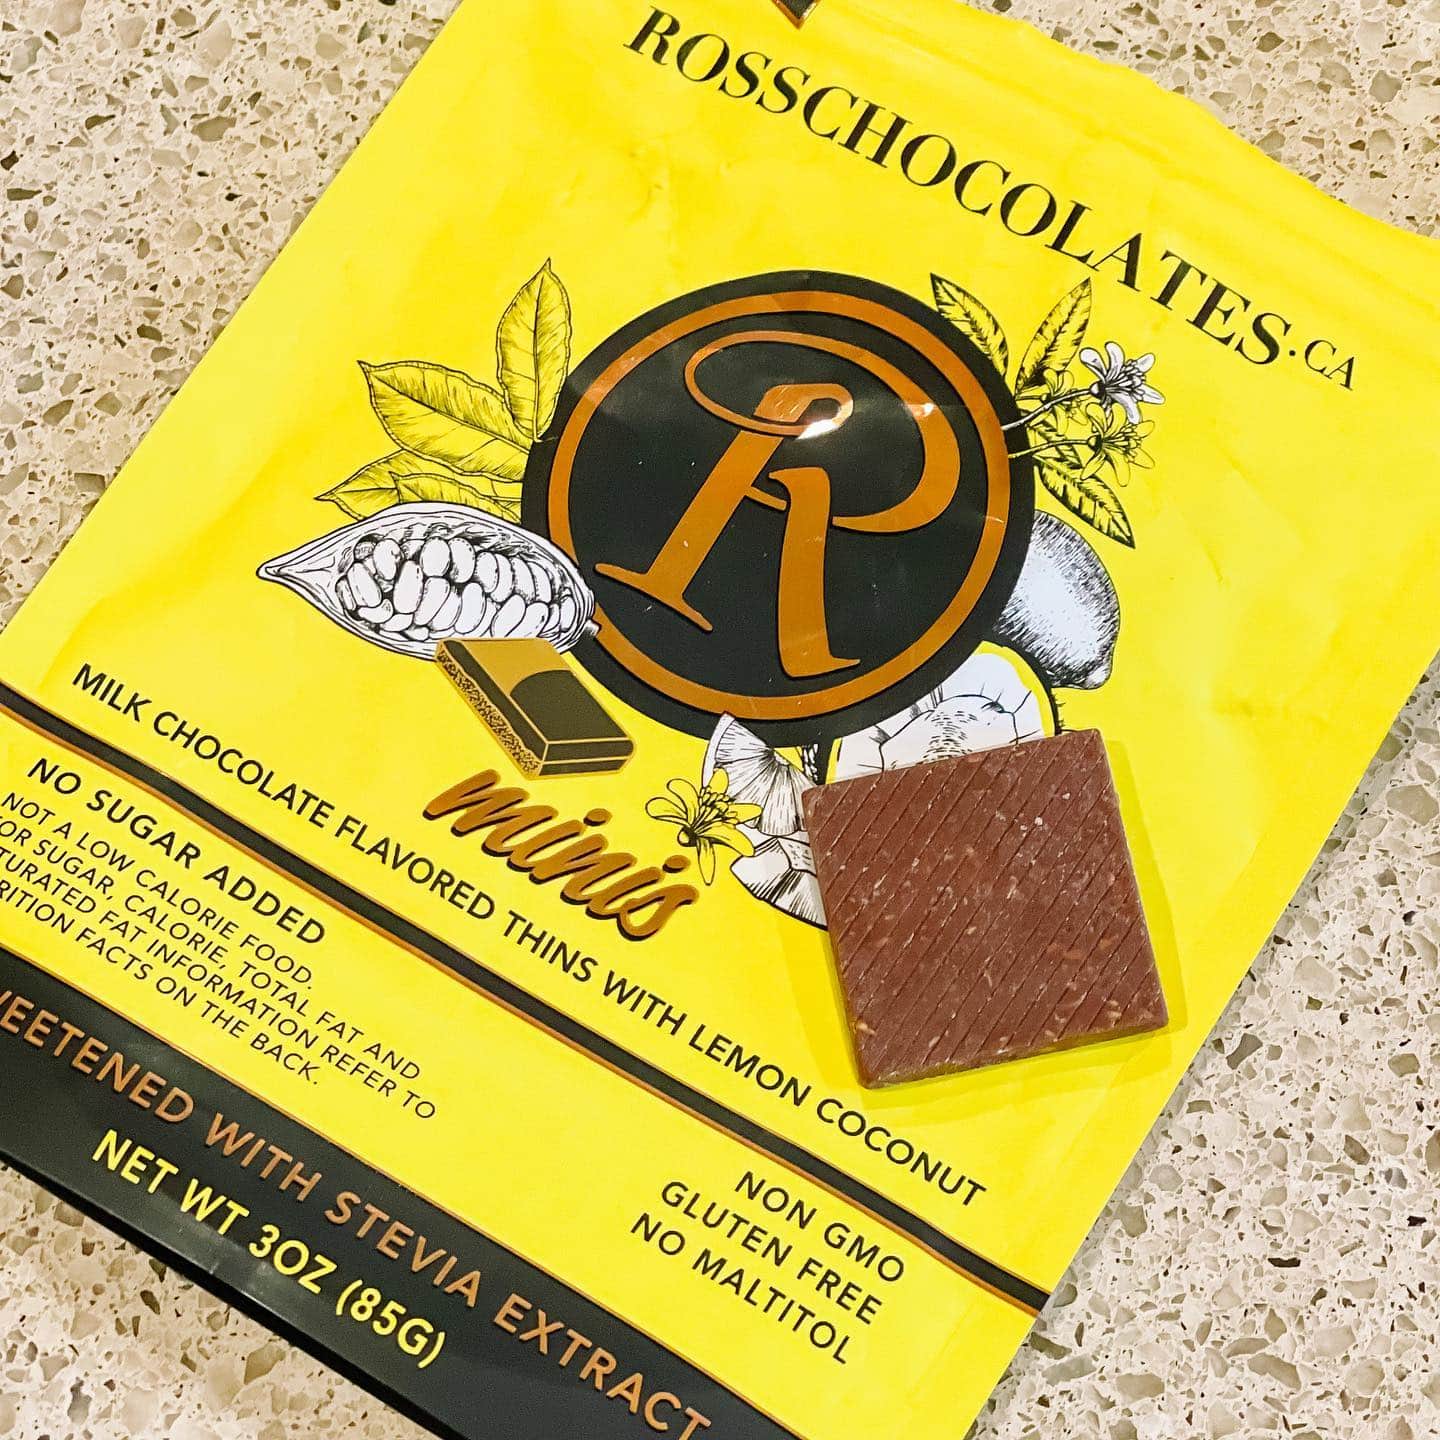 No Sugar Added Chocolates? YES PLEASE! But do they taste good? YES SIREE BOB! I received a sample of the mini #rosschocolates in lemon &  coconut… which just made me wanting to try the other flavors! 

❓Do you like flavored chocolate? What’s your fav? 

#ketofriendly #glutenfree #chocolatelover #lemoncoconut #chocolatemini